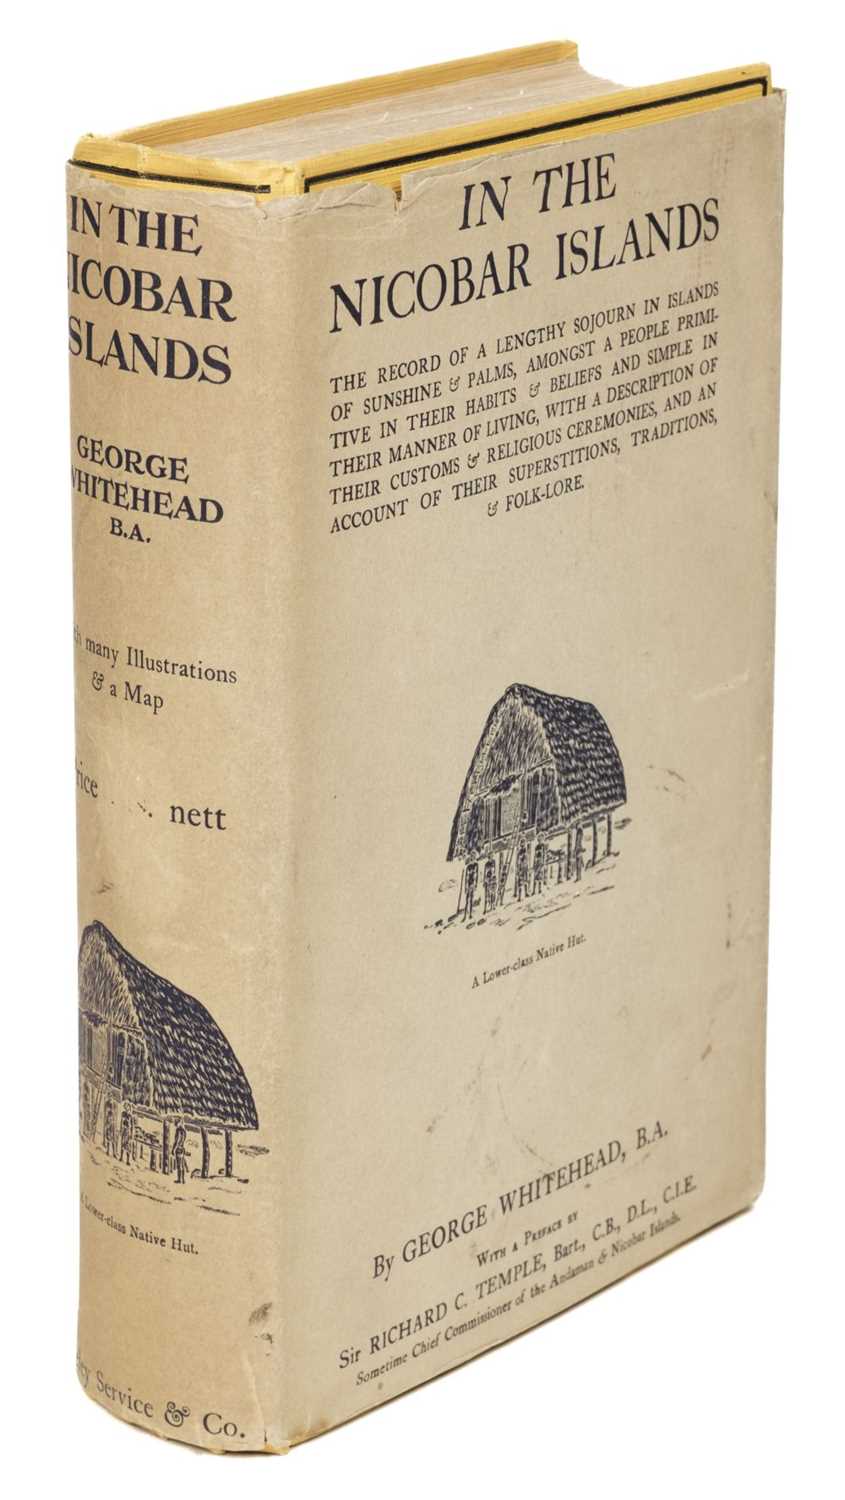 Lot 42 - Whitehead (George). In the Nicobar Islands, 1st edition, London: Seeley, Service & Co, 1924